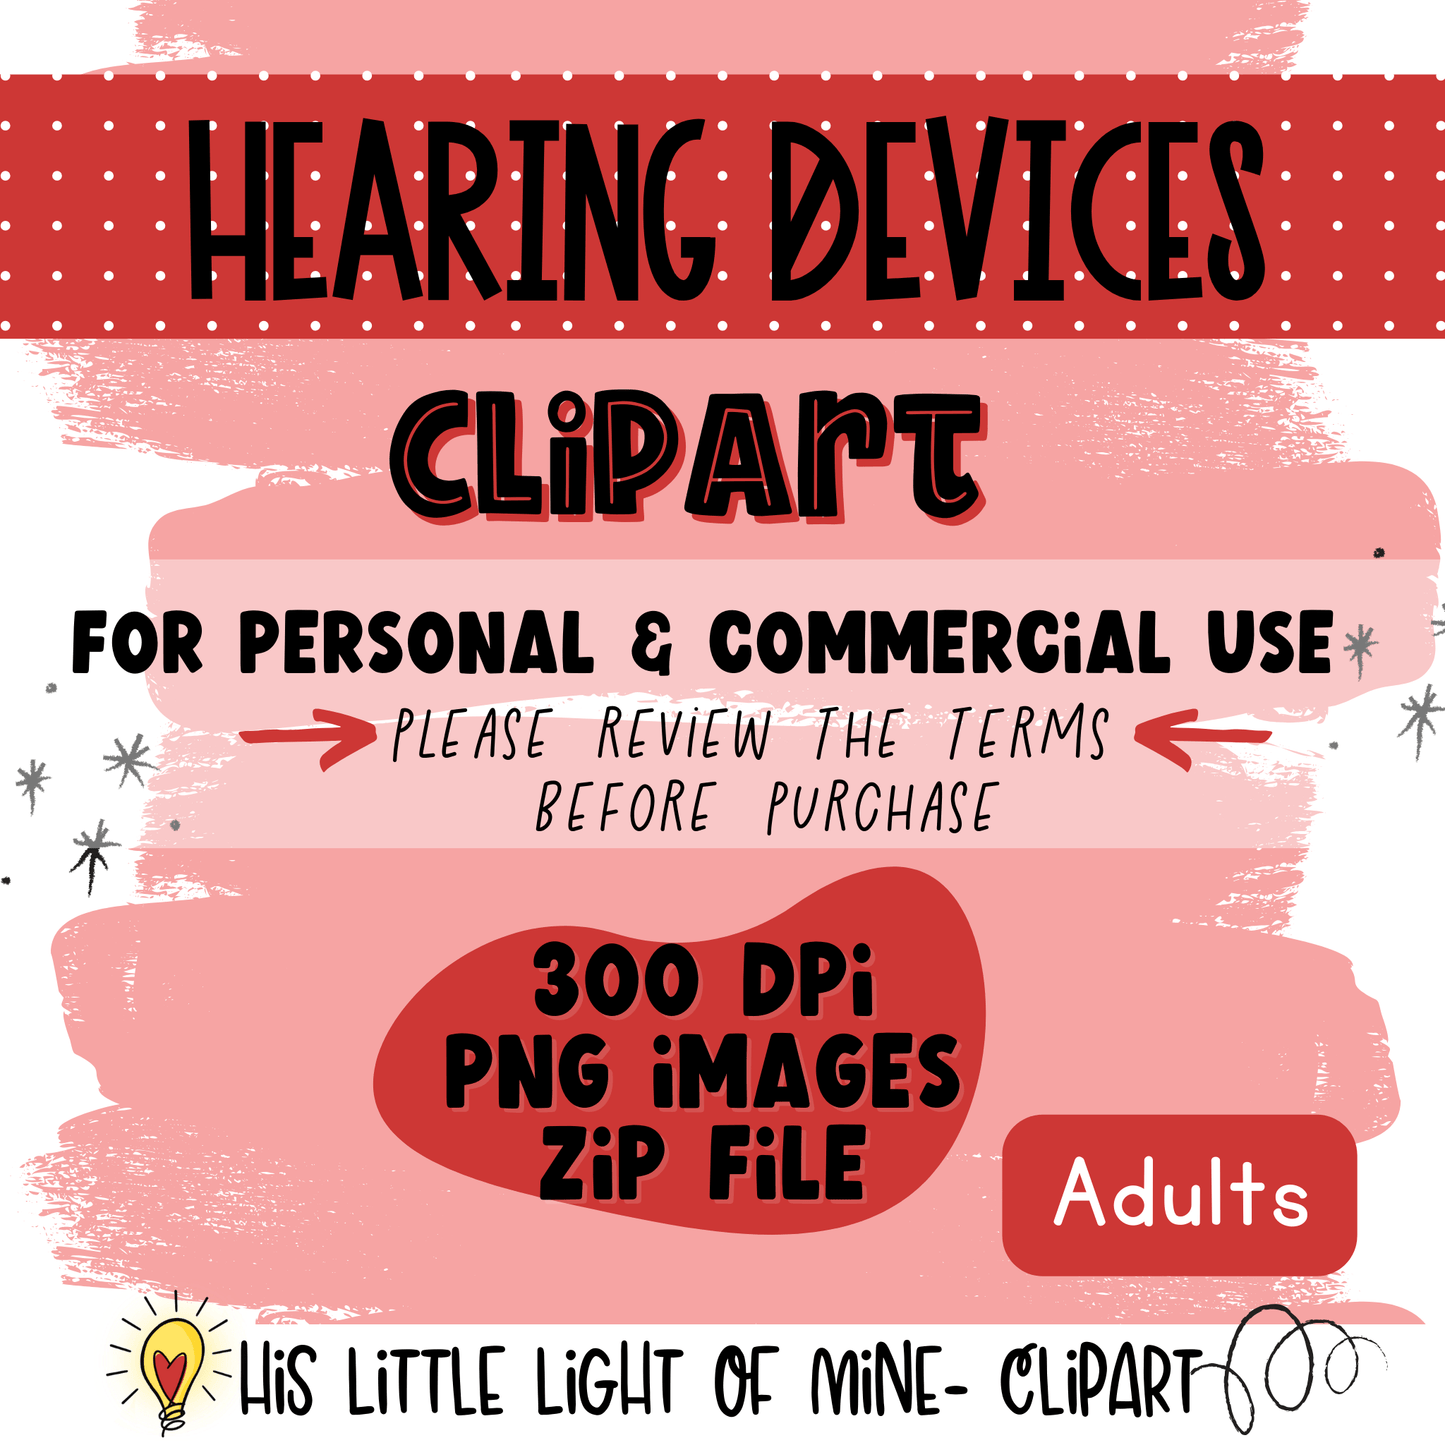 Hearing Devices Adults clip art pack features both personal and commercial use (with terms) and the types and sizes of the files